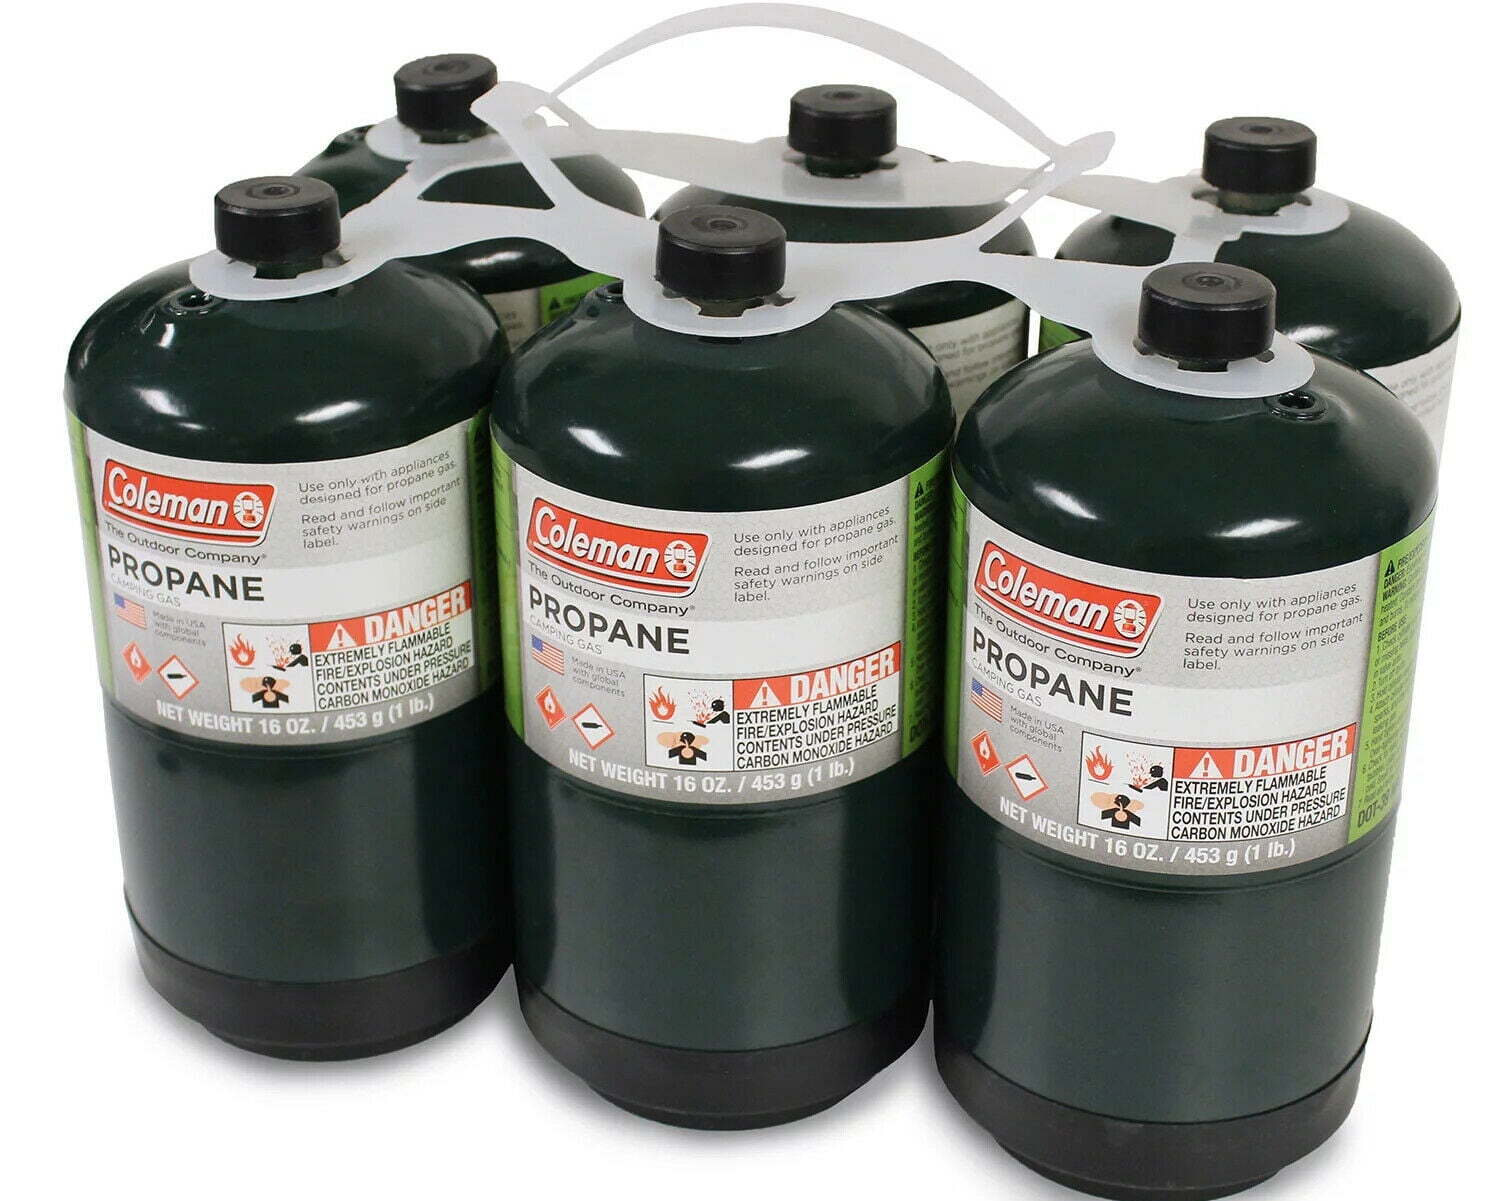 How To Store Coleman Propane Tanks